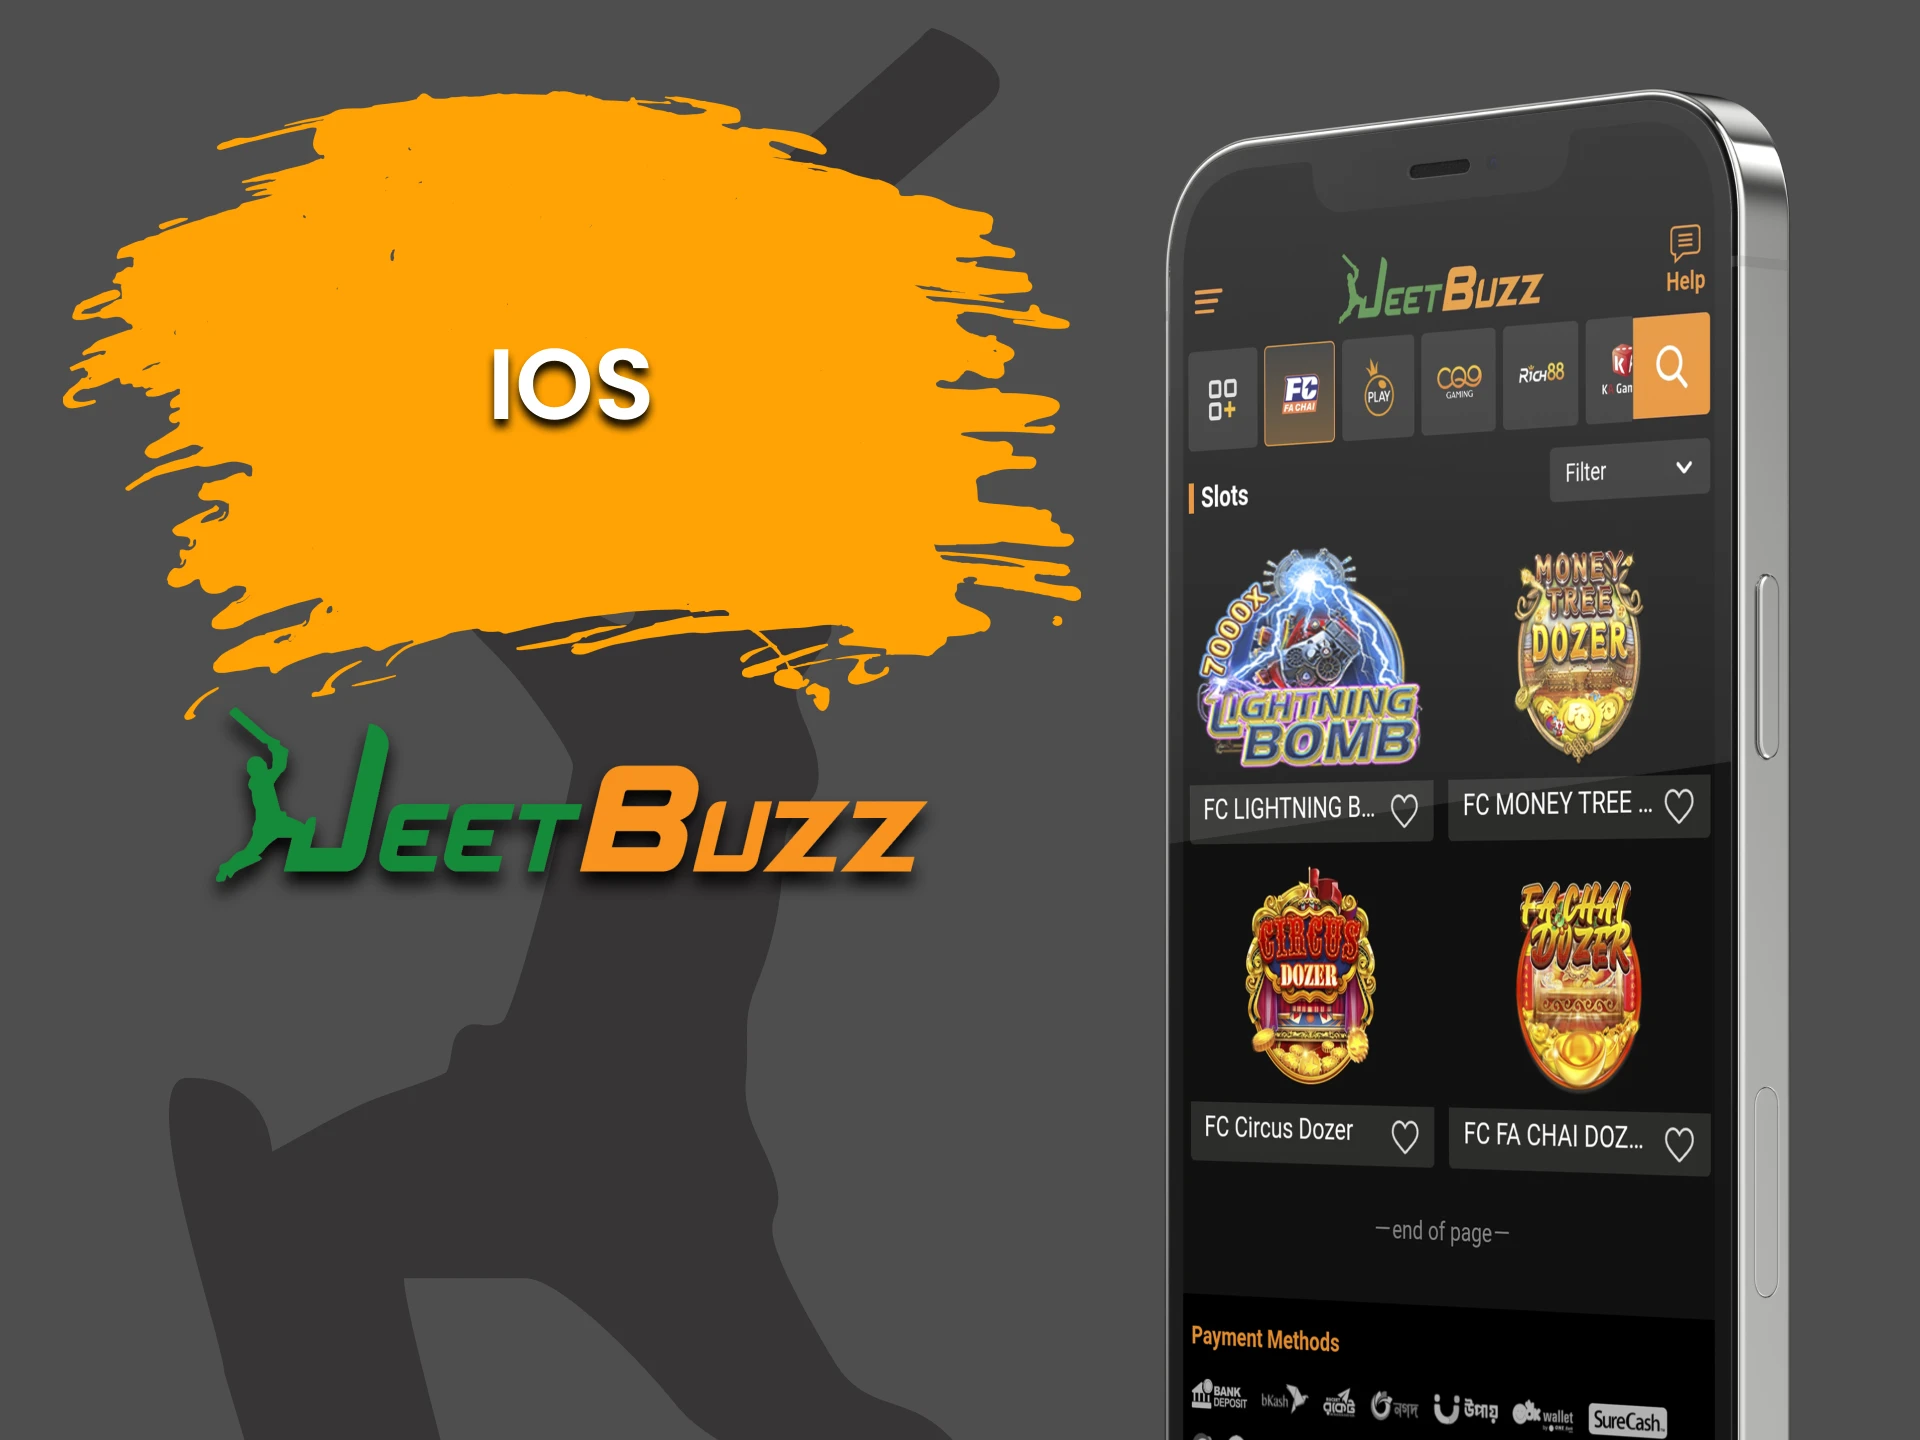 Download the JeetBuzz iOS app for Arcade games.